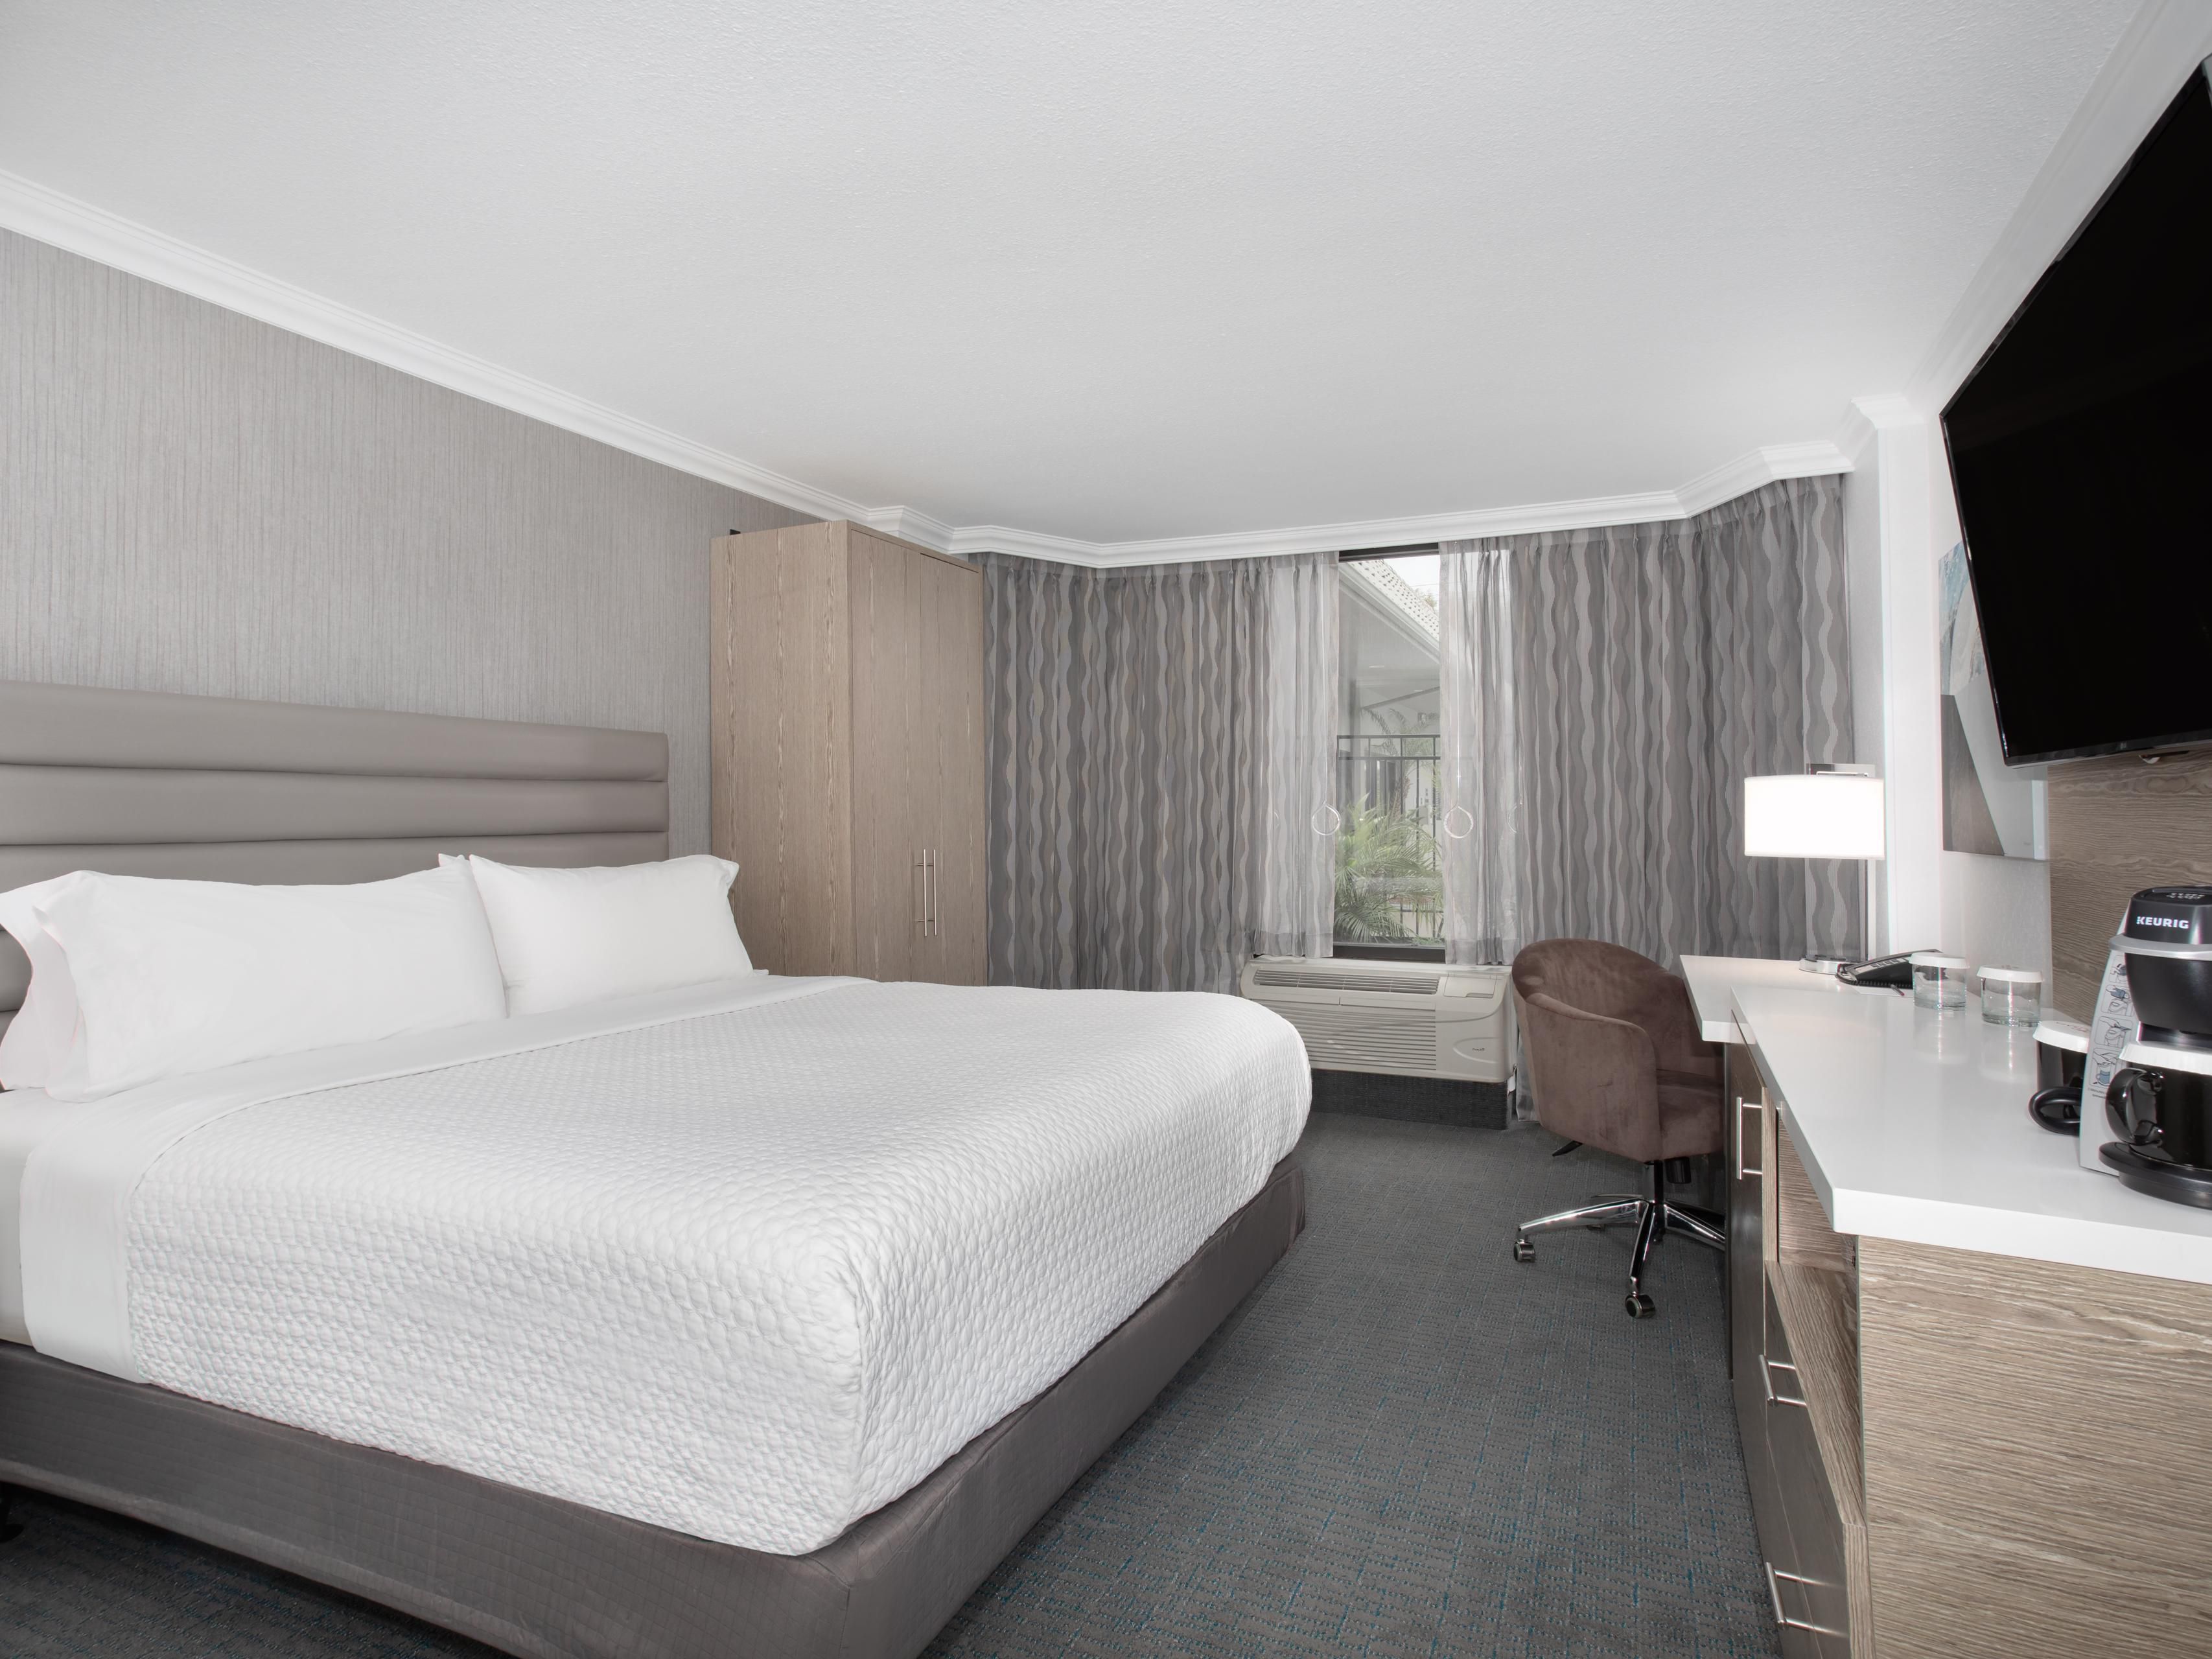 Stay seamlessly connected with our complimentary high-speed Wi-Fi, ensuring you're always in touch. Our stylish rooms provide an ergonomic workspace, offering the perfect environment to be productive and relaxed during your stay. Whether you're on a business trip or enjoying some downtime, we've got your connectivity and comfort covered.